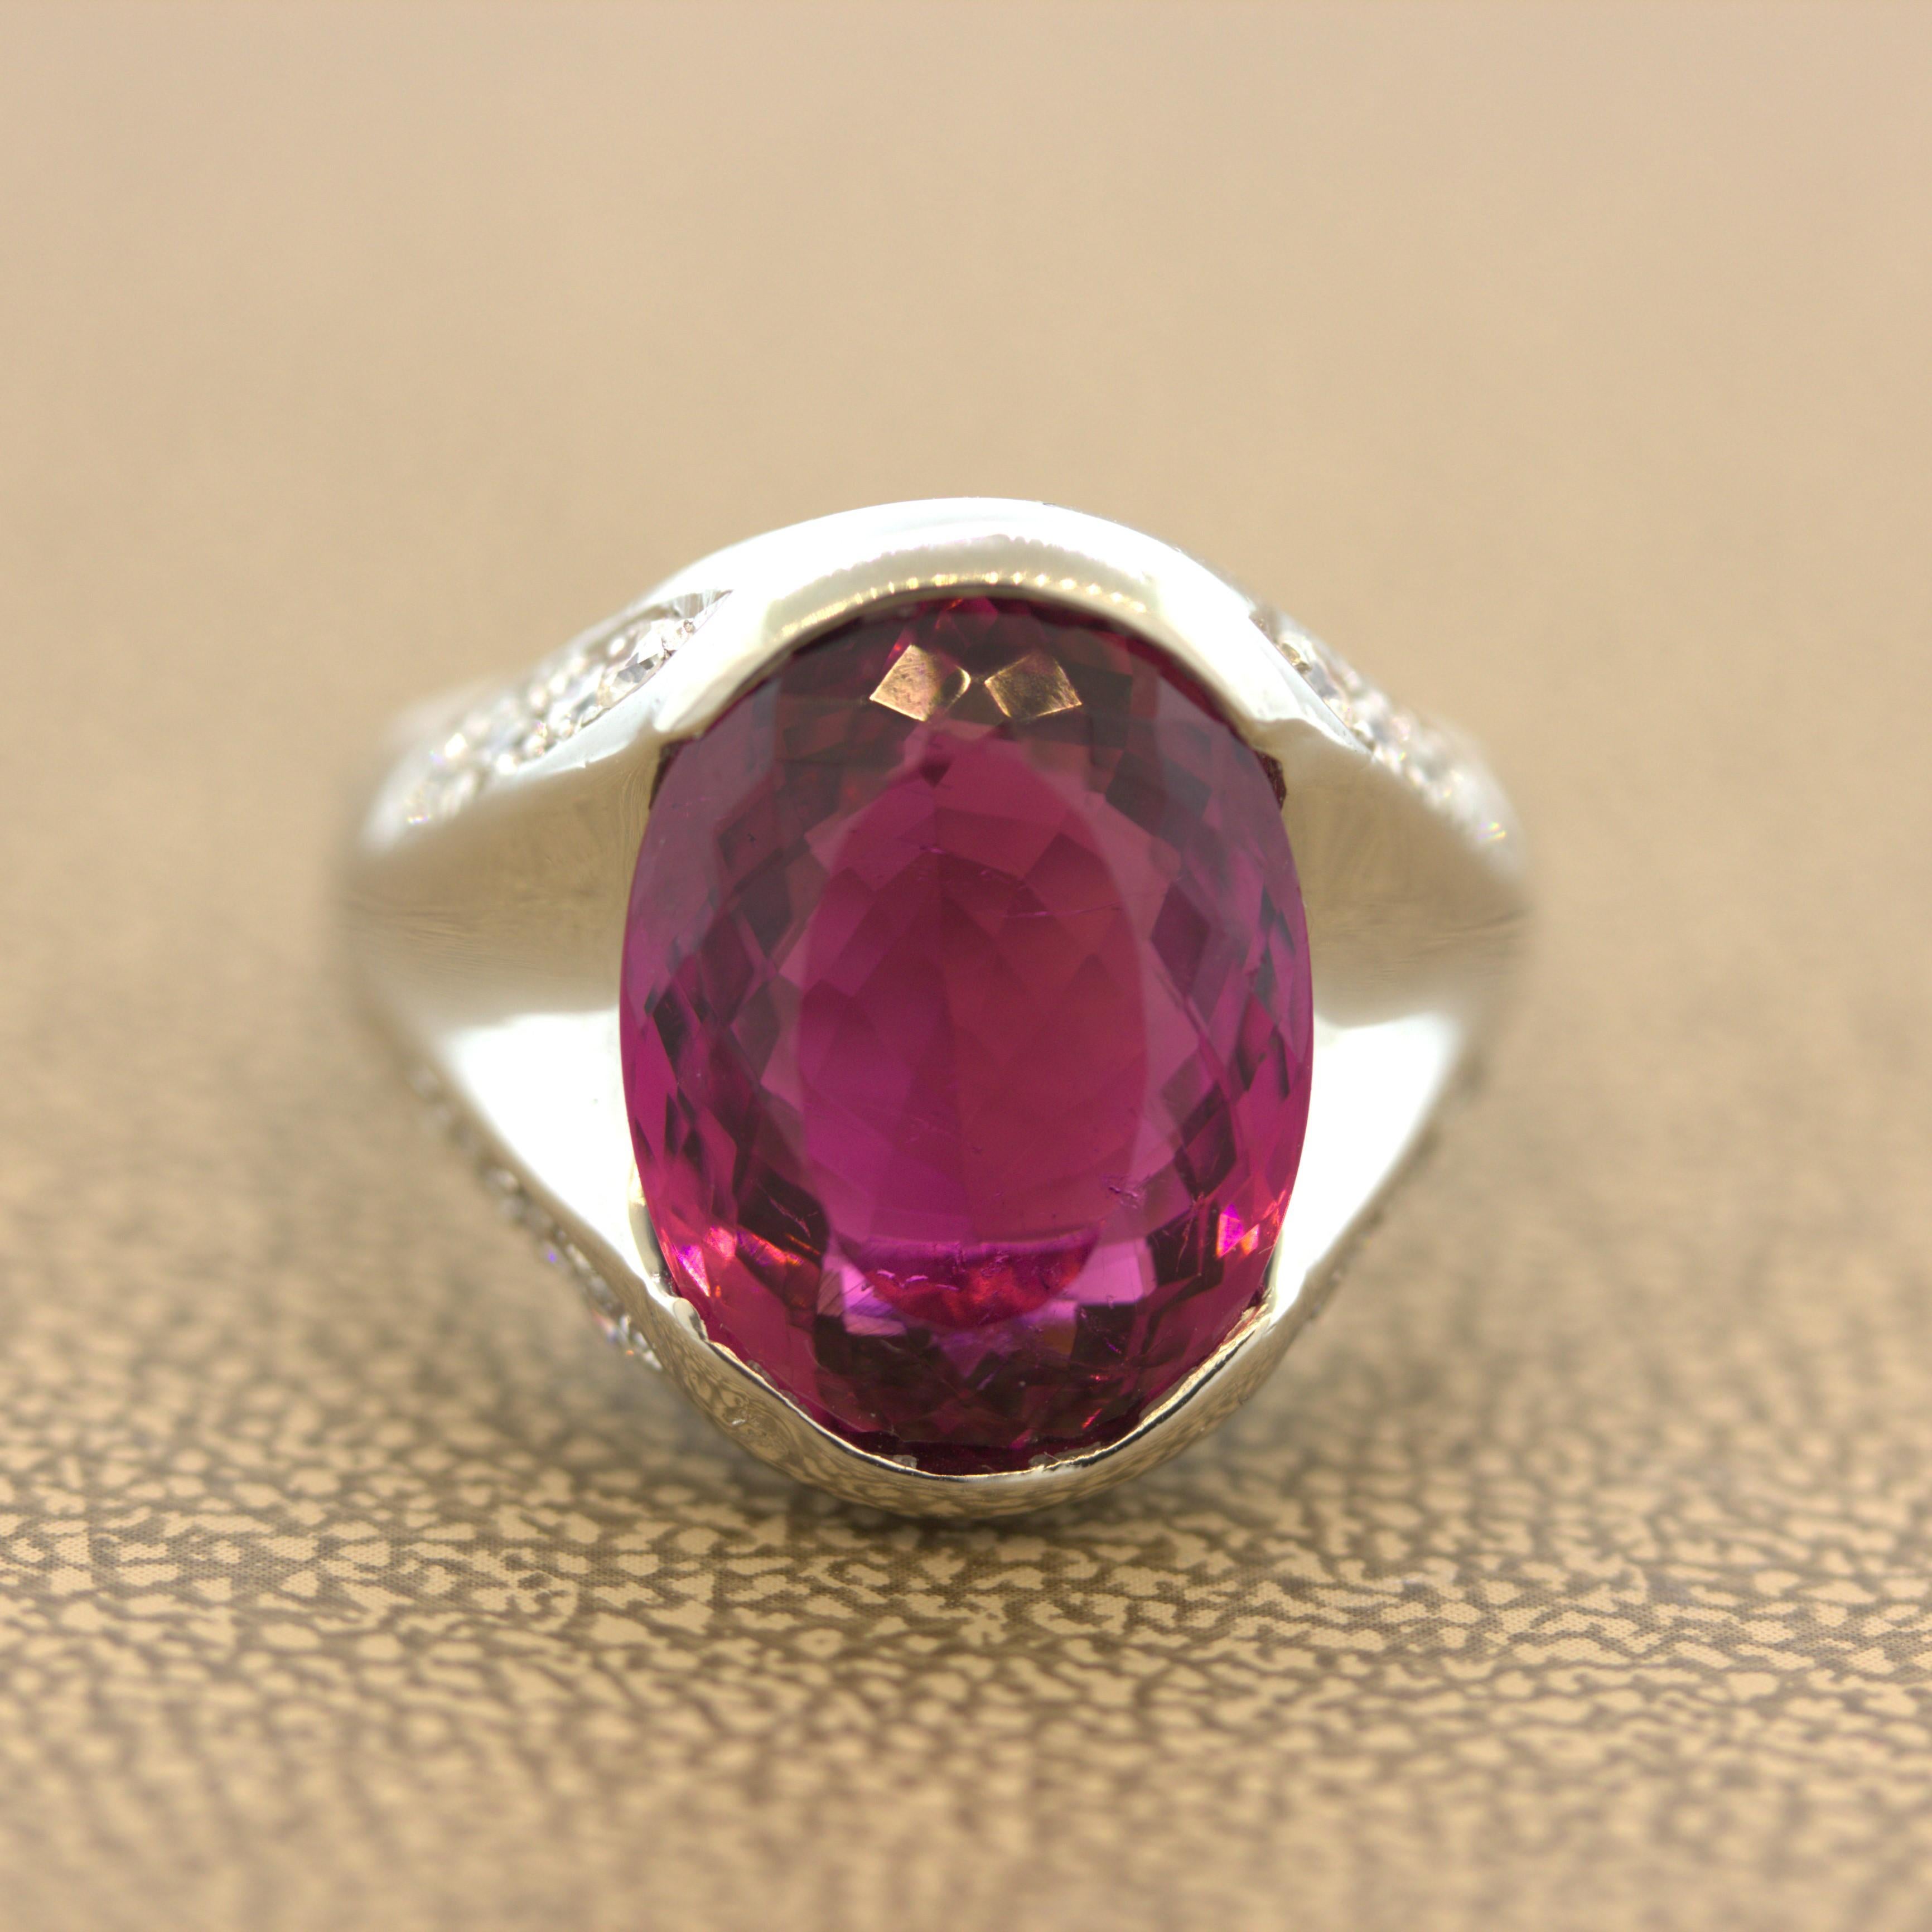 A fine brilliant pink-purple raspberry colored tourmaline takes center stage! It weighs an impressive 8.76 carats and has a bright and brilliant color that is simply sweet and juicy. It is complemented by 0.83 carats of round brilliant-cut diamonds